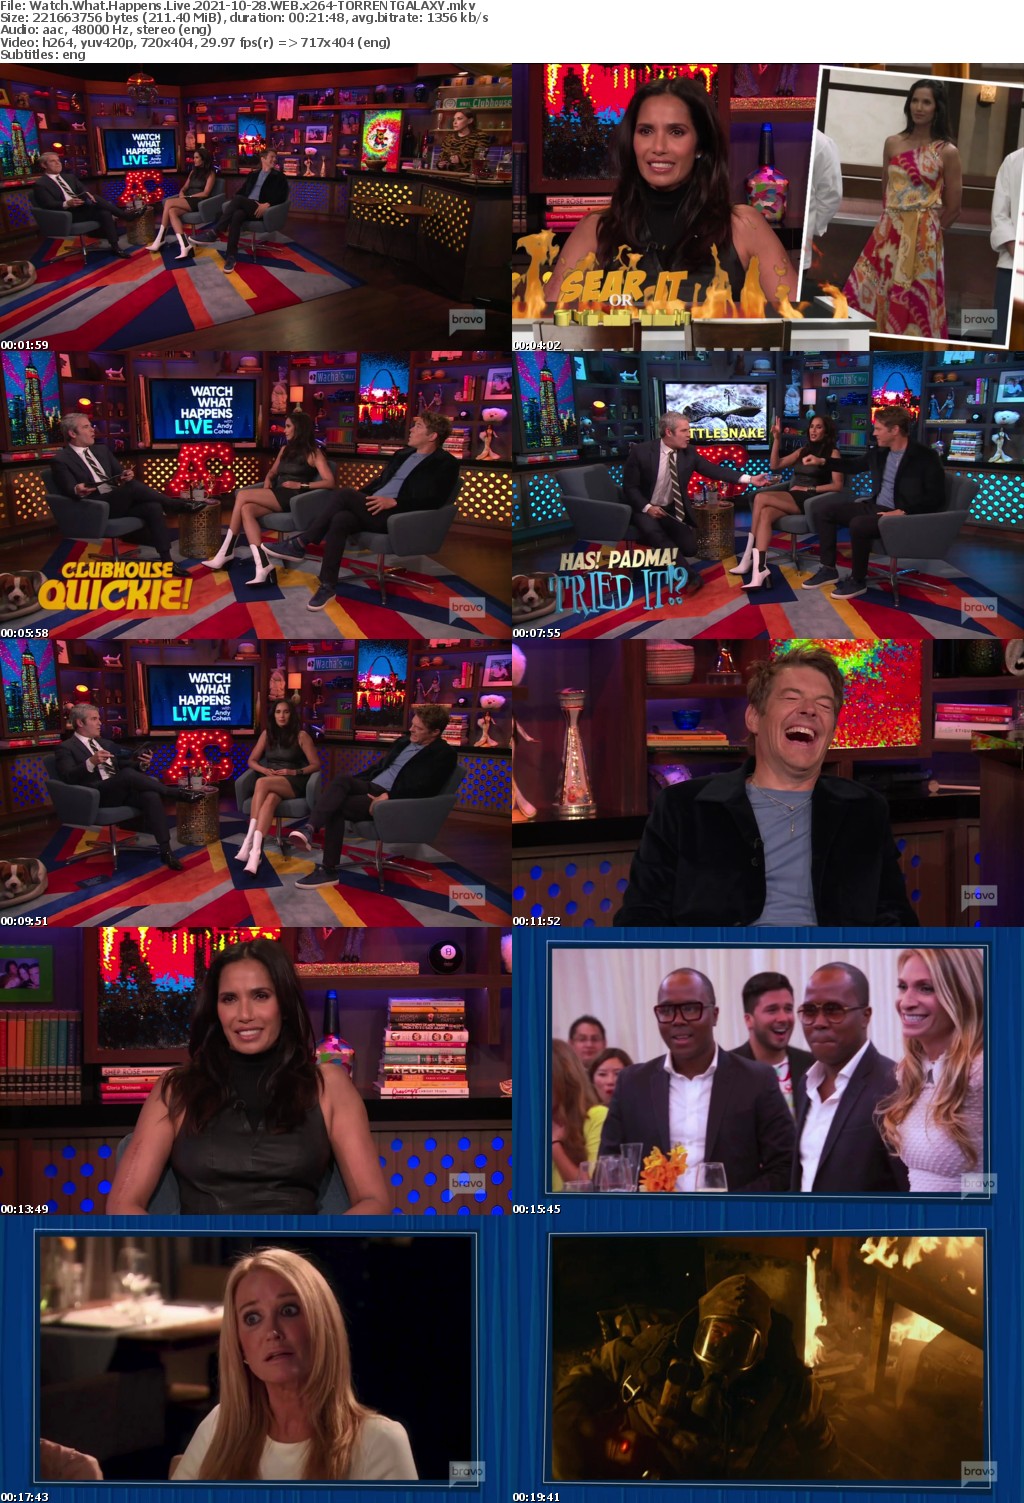 Watch What Happens Live 2021-10-28 WEB x264-GALAXY